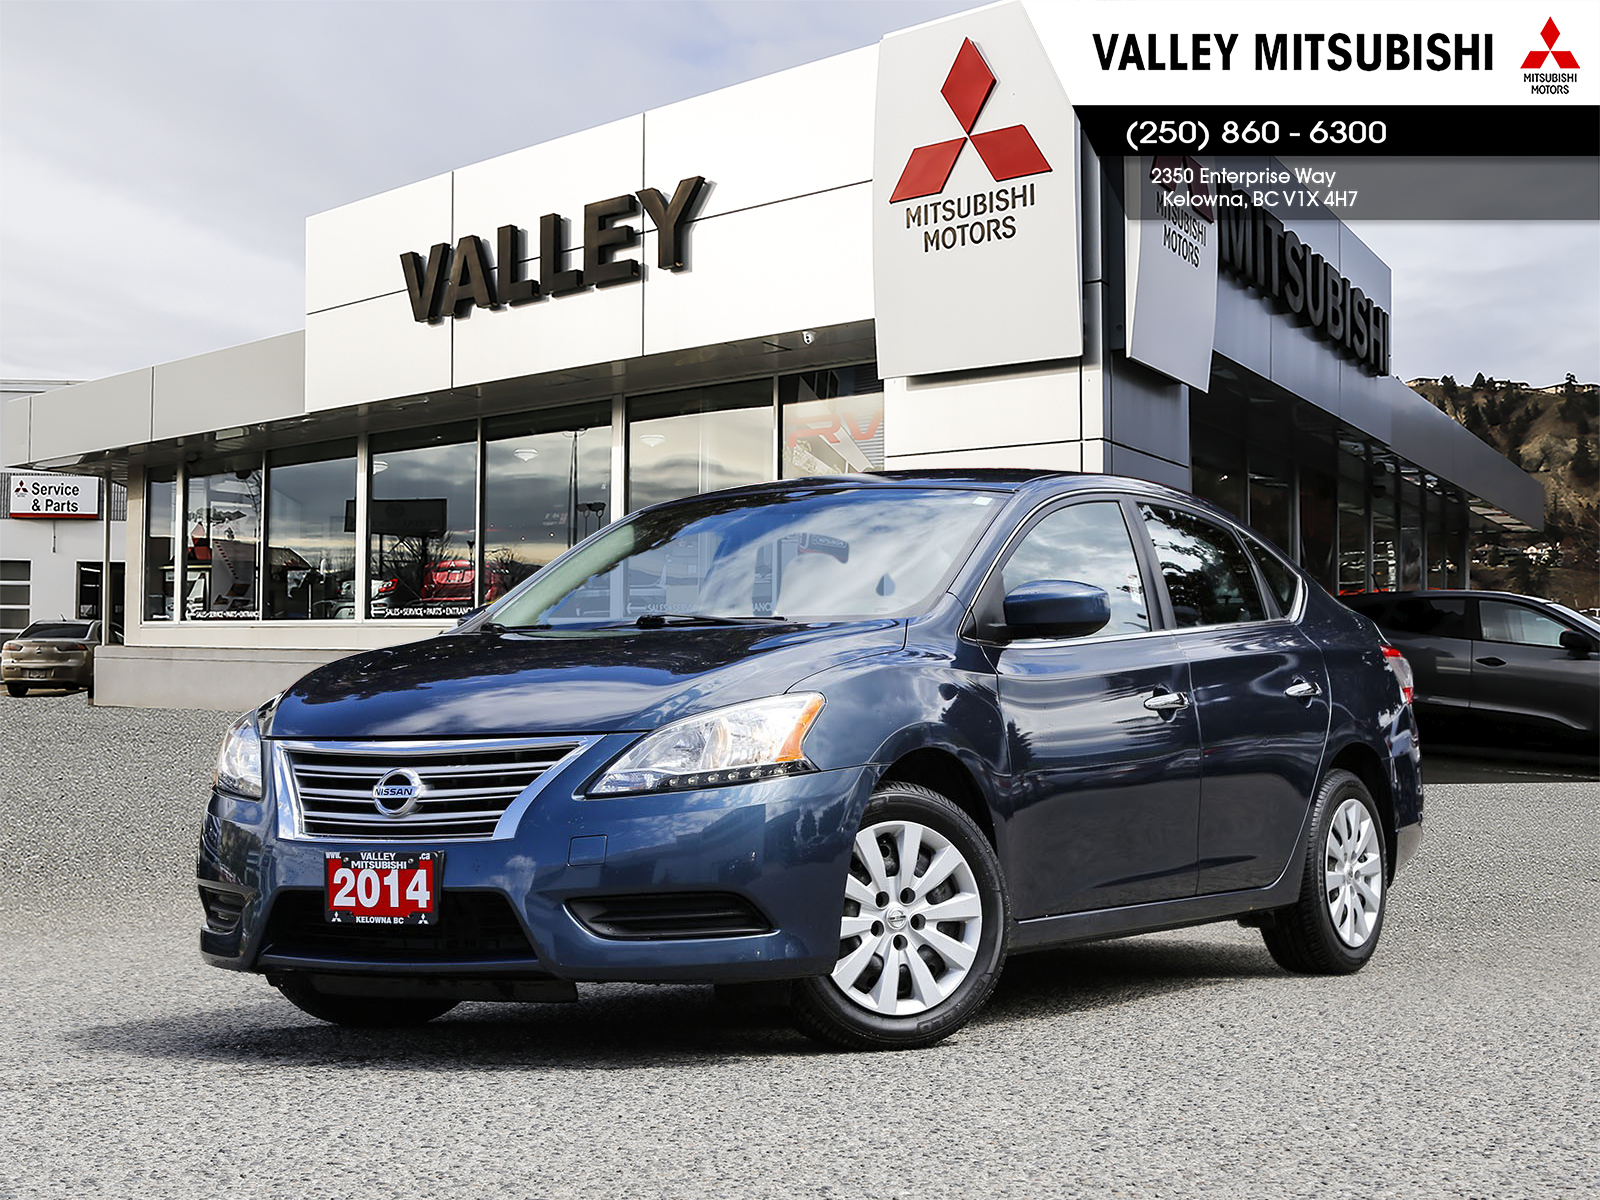 2014 Nissan Sentra S, CAMERA, AUTOMATIC, 4 CYL, GREAT FUEL ECONOMY